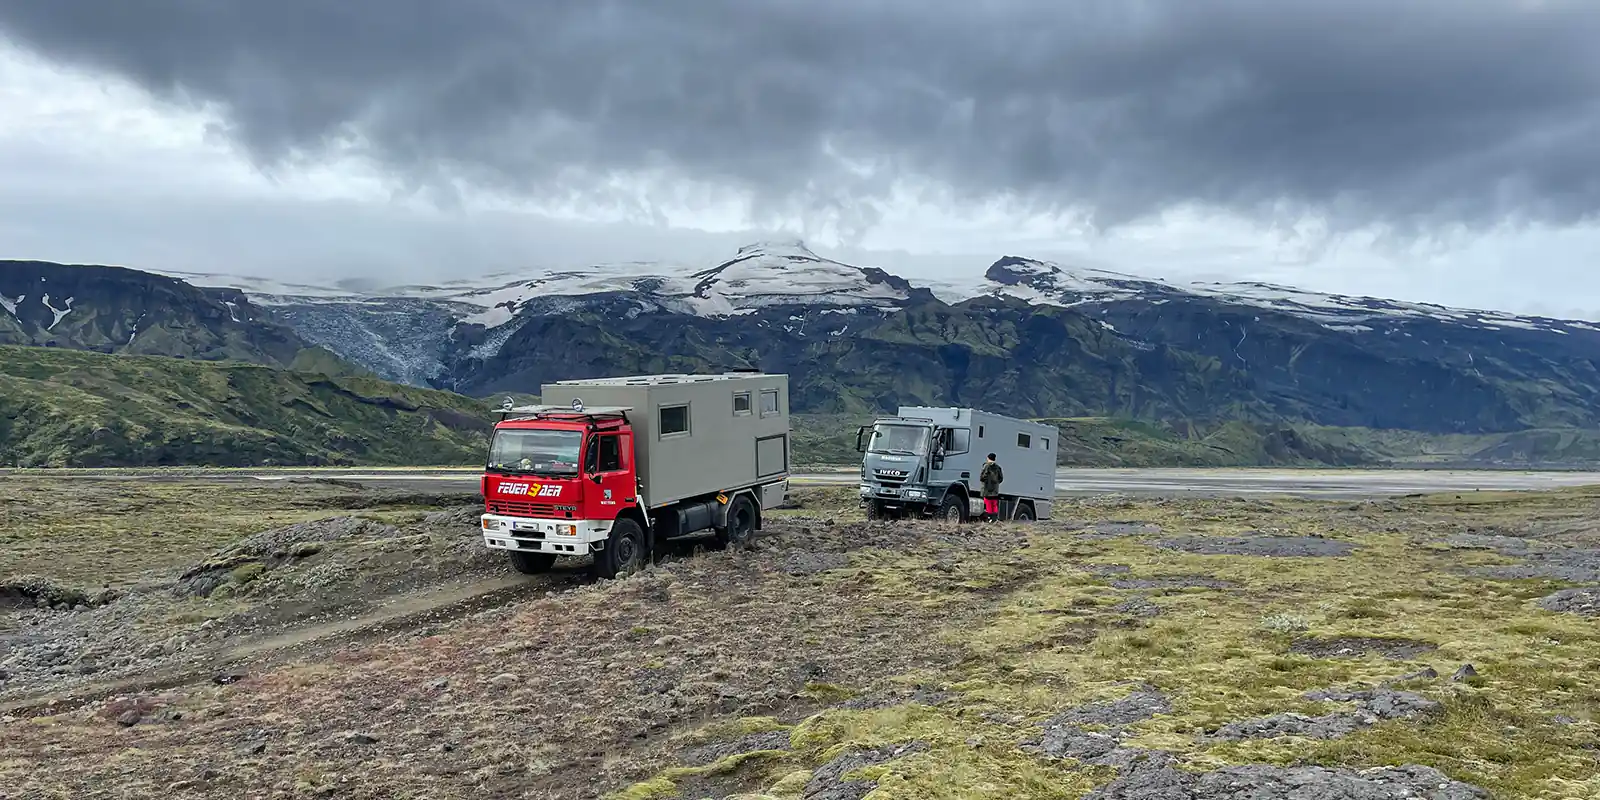 Highlands of Iceland expedition